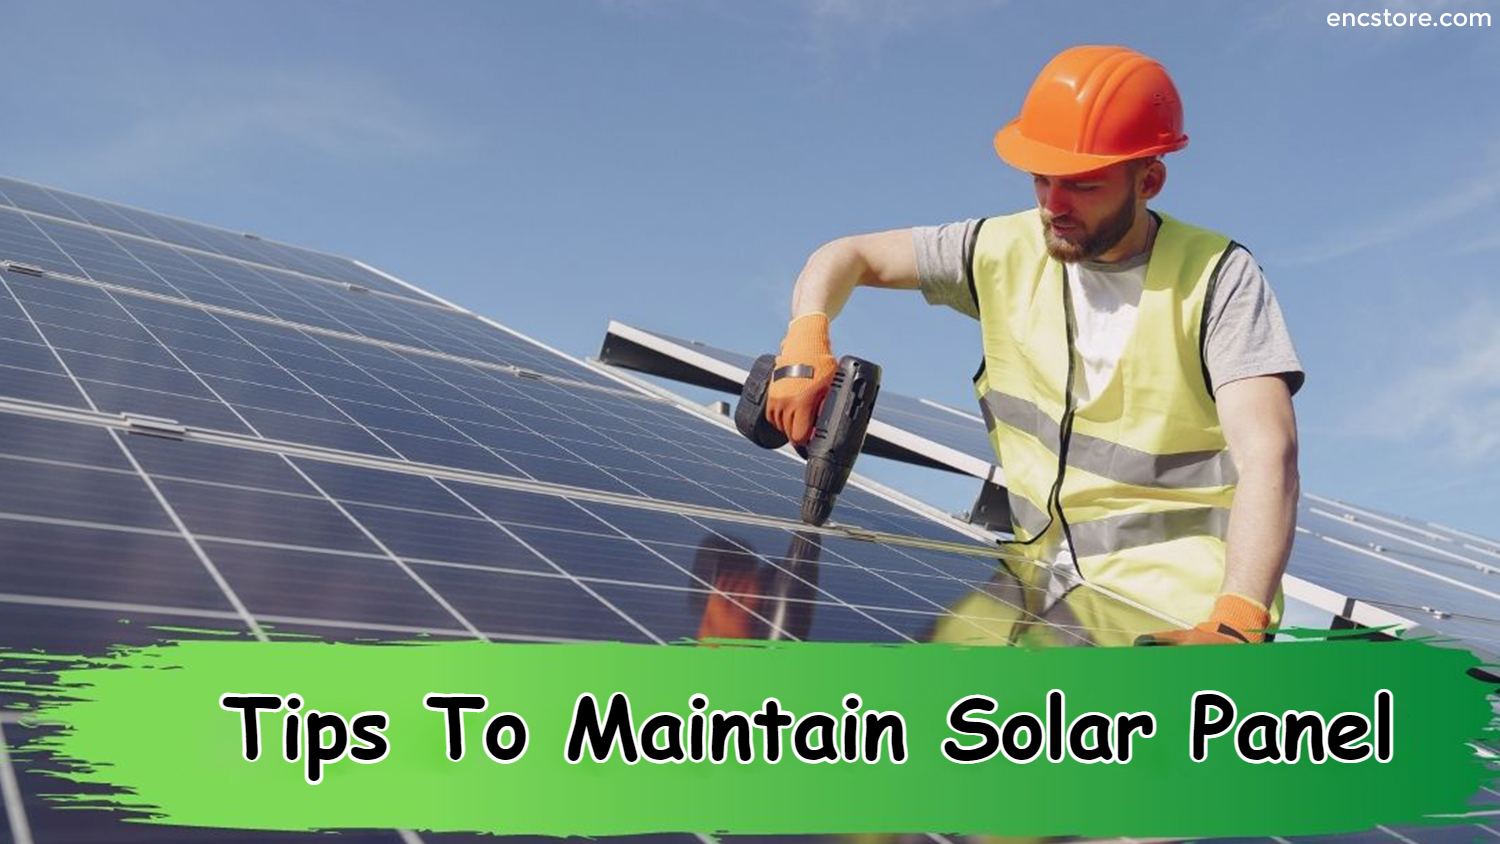 Tips To Maintain Solar Panel